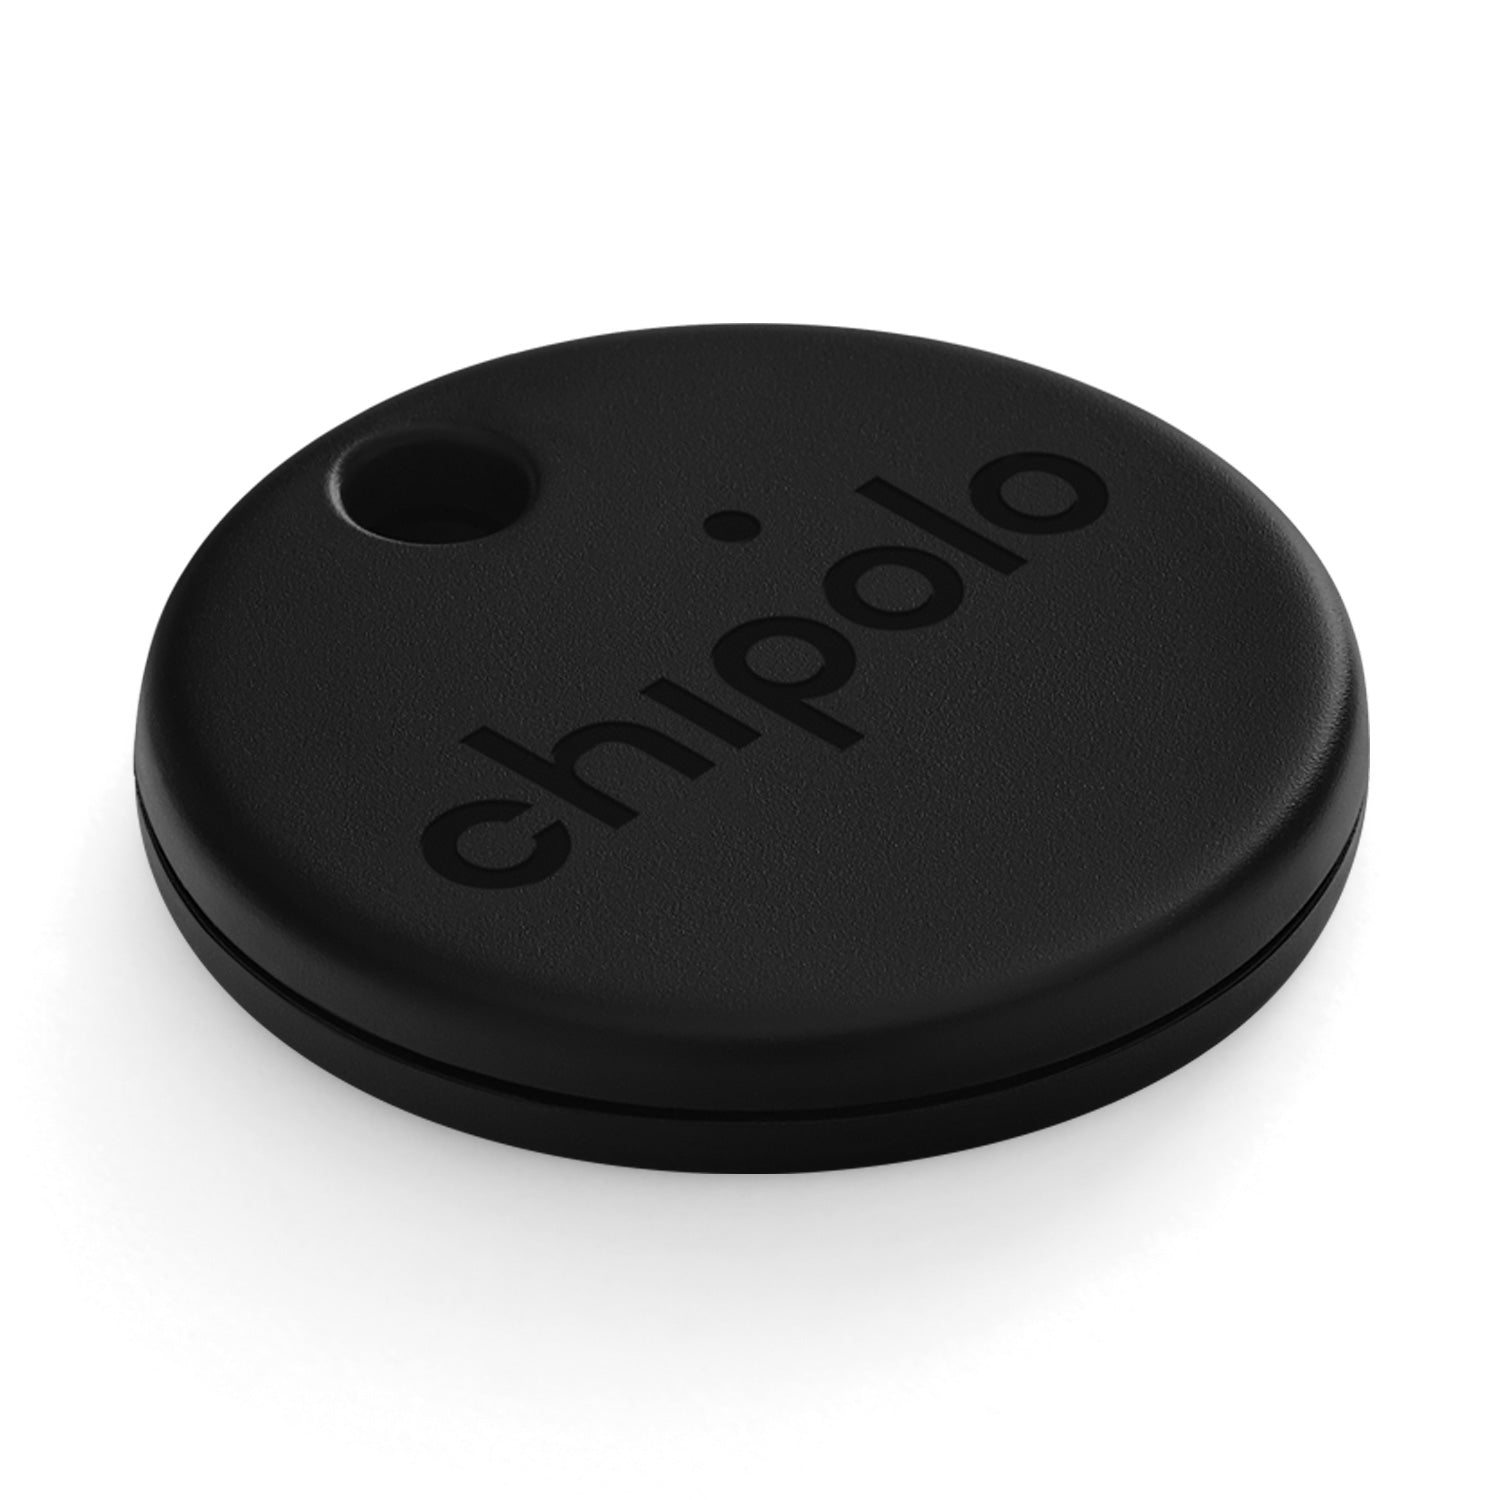 Chipolo - Black 'Chipolo One' Bluetooth Item Finder